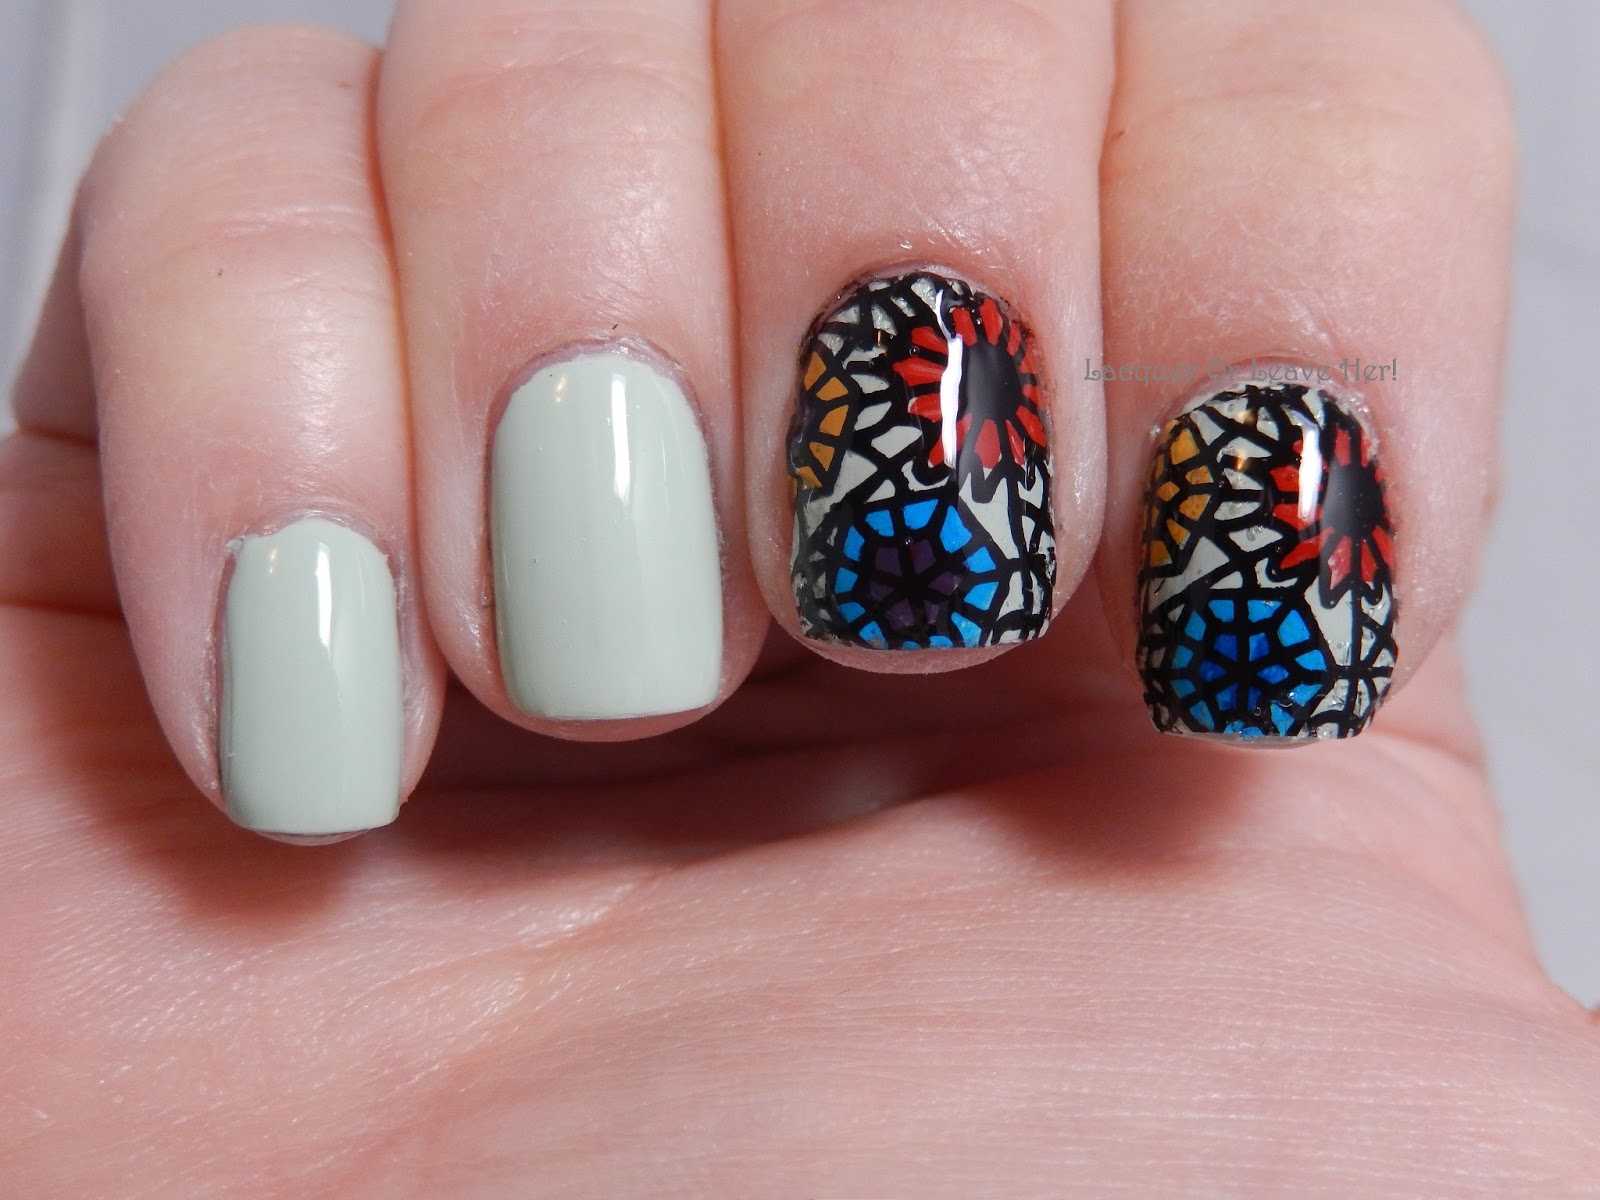 Lacquer or Leave Her!: Tutorial: Home-made decal nail wraps